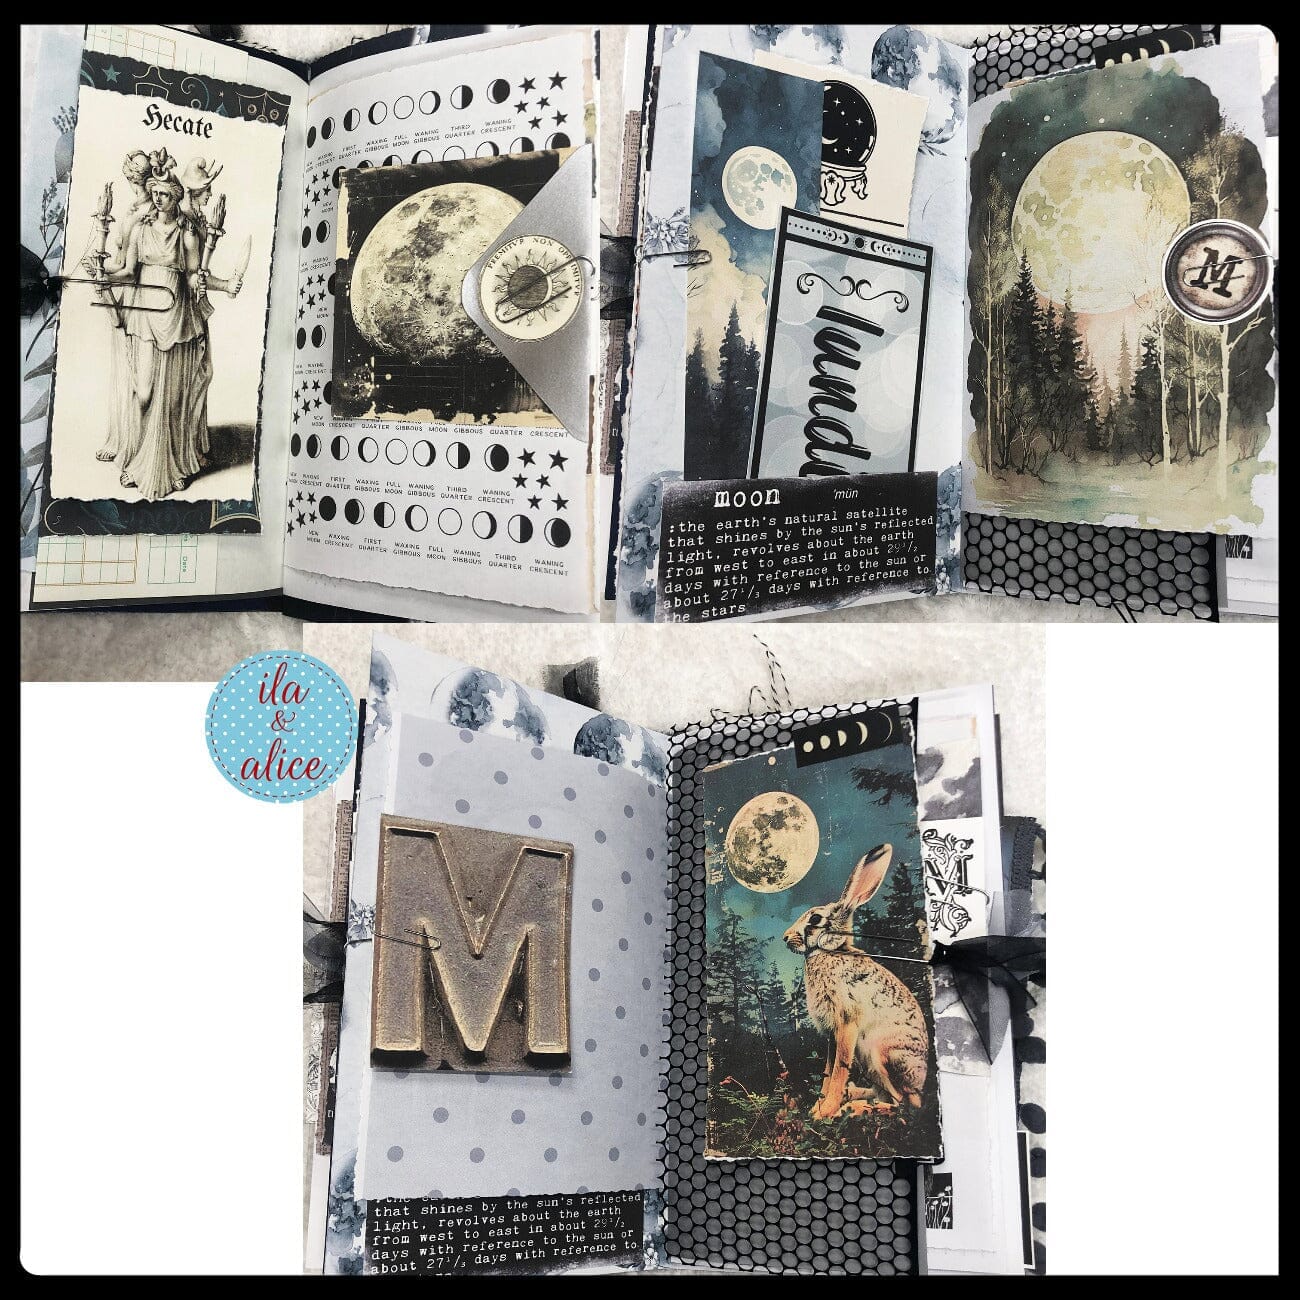 Vintage Moon Junk Journal with Collage Cover Journal ila & alice 